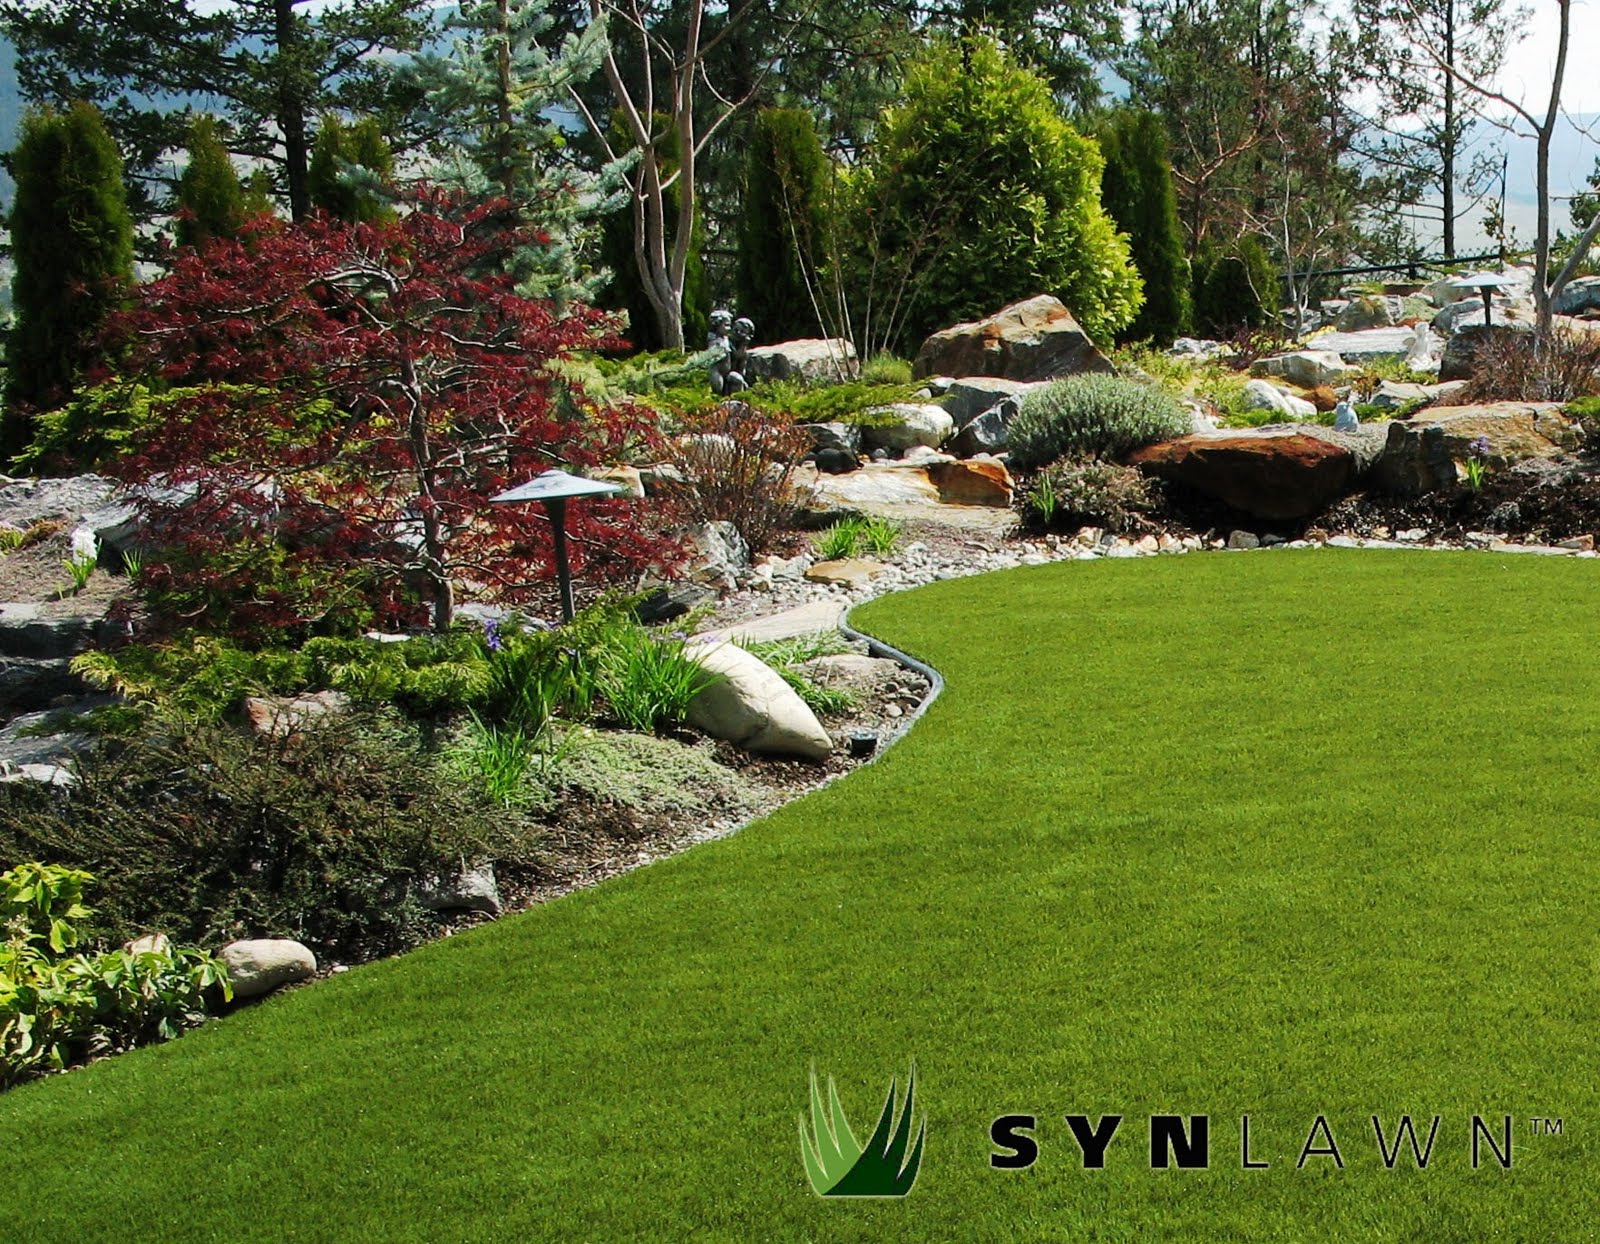 With the variety of grasses and systems available, the applications ...